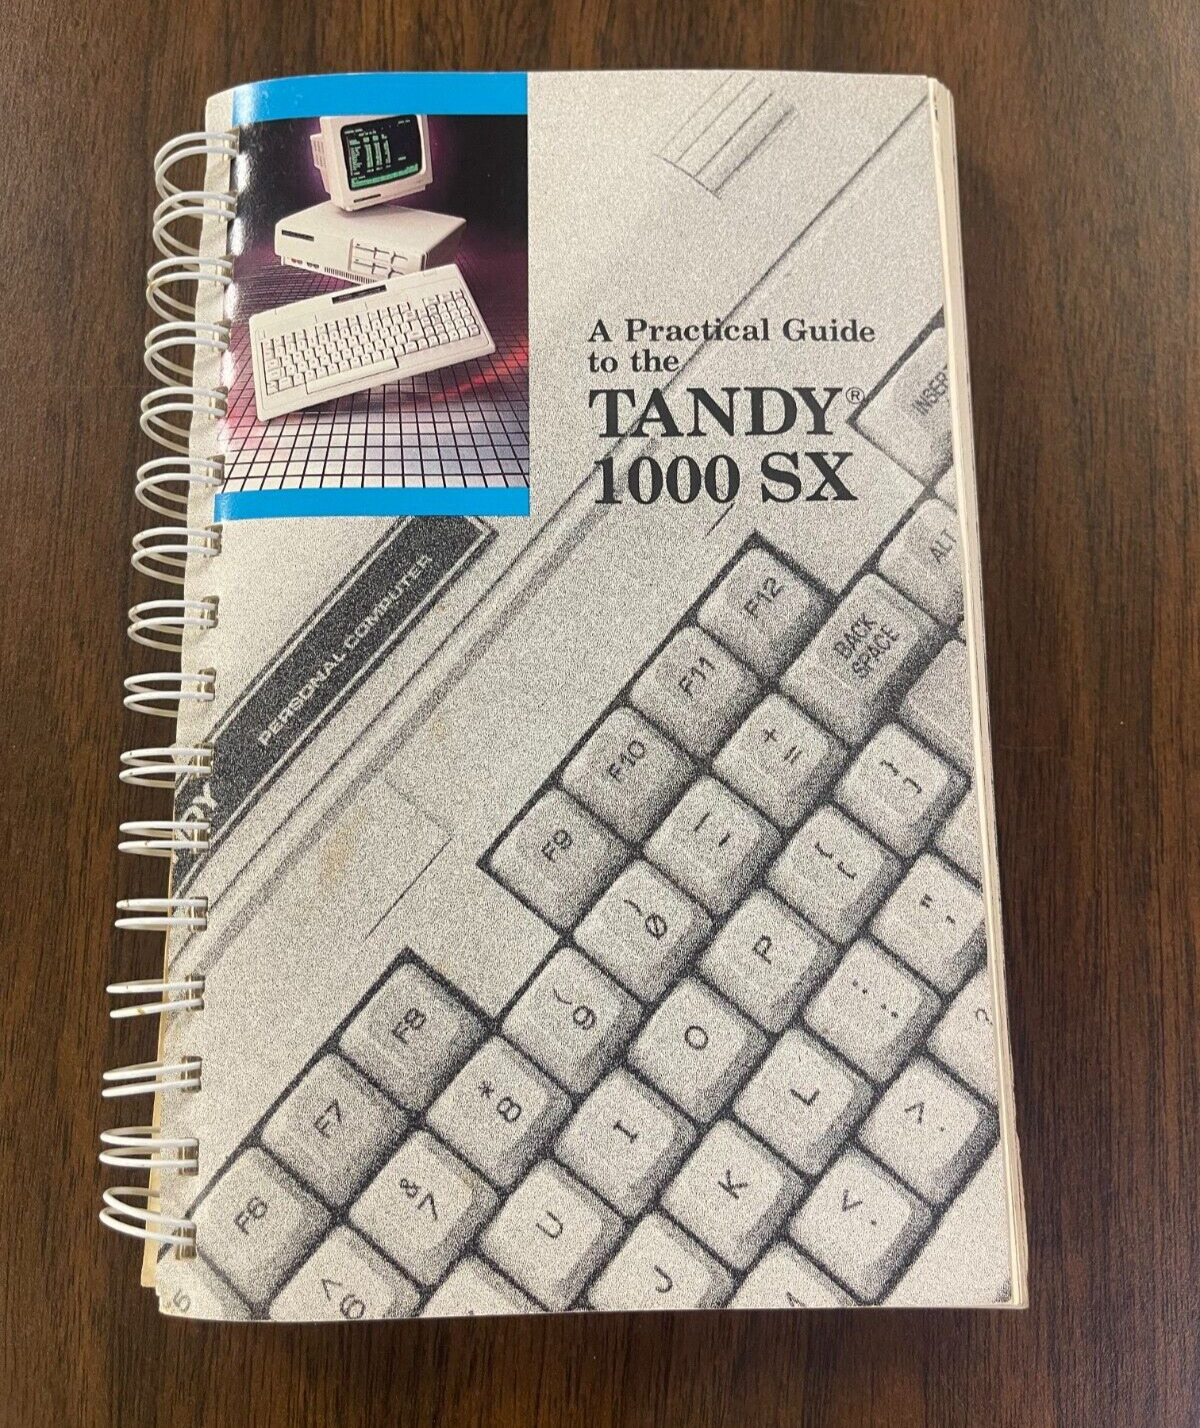 VTG 1986 A Practical Guide to the Tandy 1000 SX Book-Radio Shack